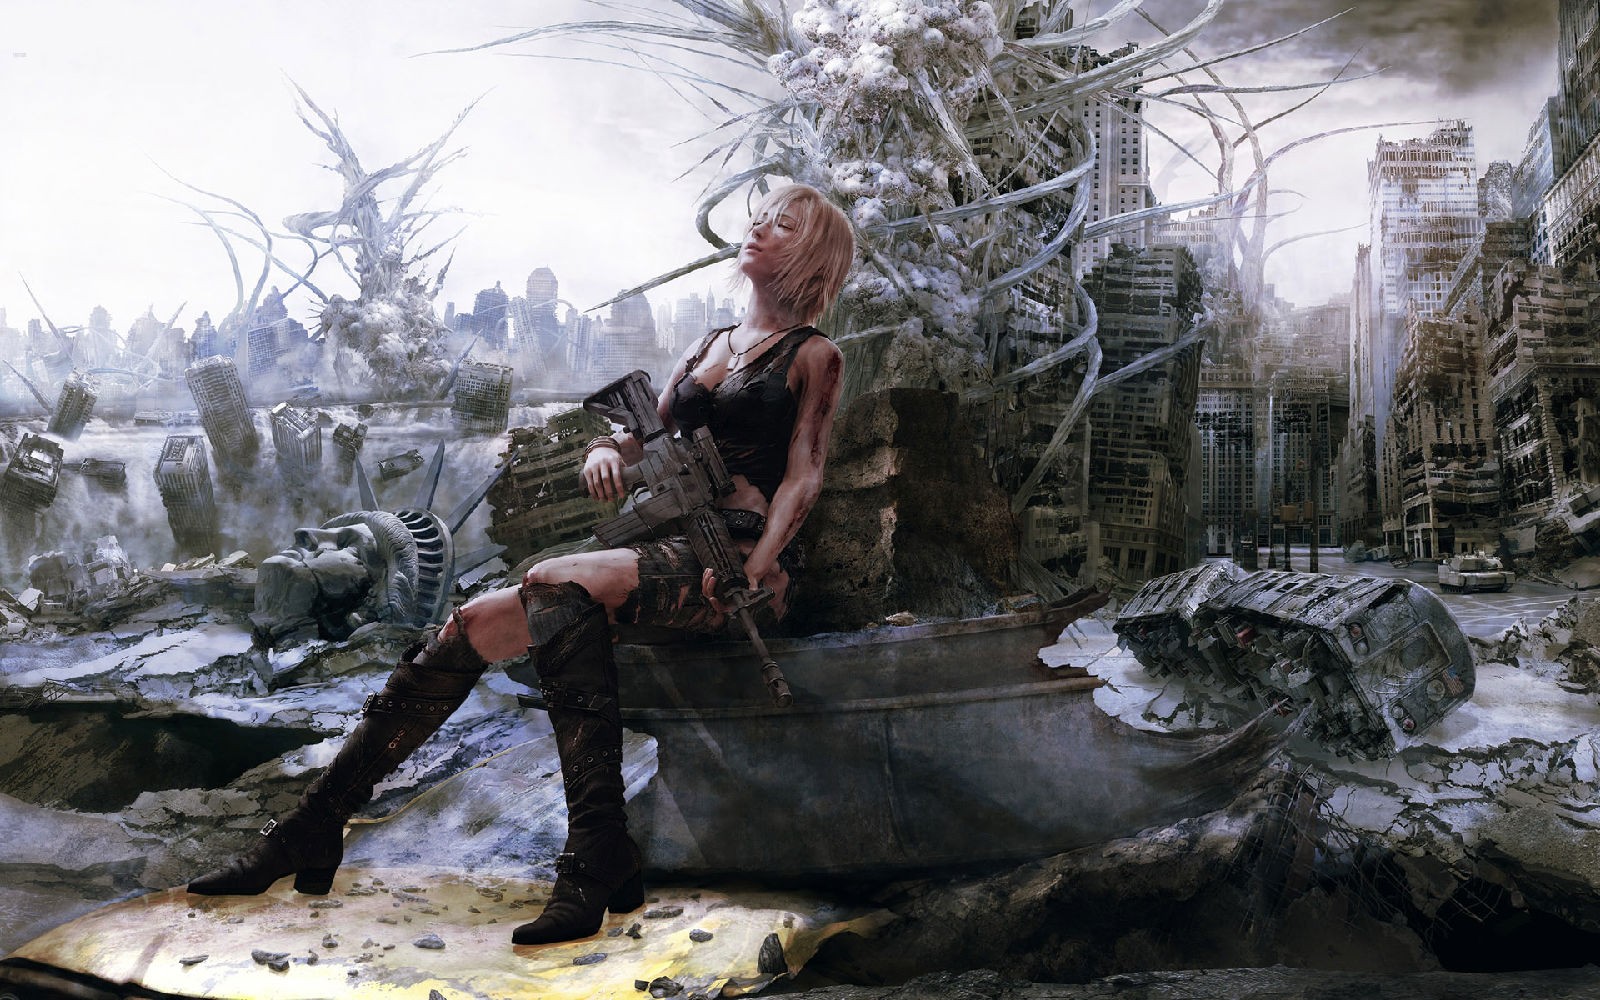 People 1600x1000 women gun Parasite Eve The 3rd Birthday girls with guns video games Video Game Horror sitting machine gun video game art video game girls Aya Brea horror blood closed eyes CGI apocalyptic cityscape USA